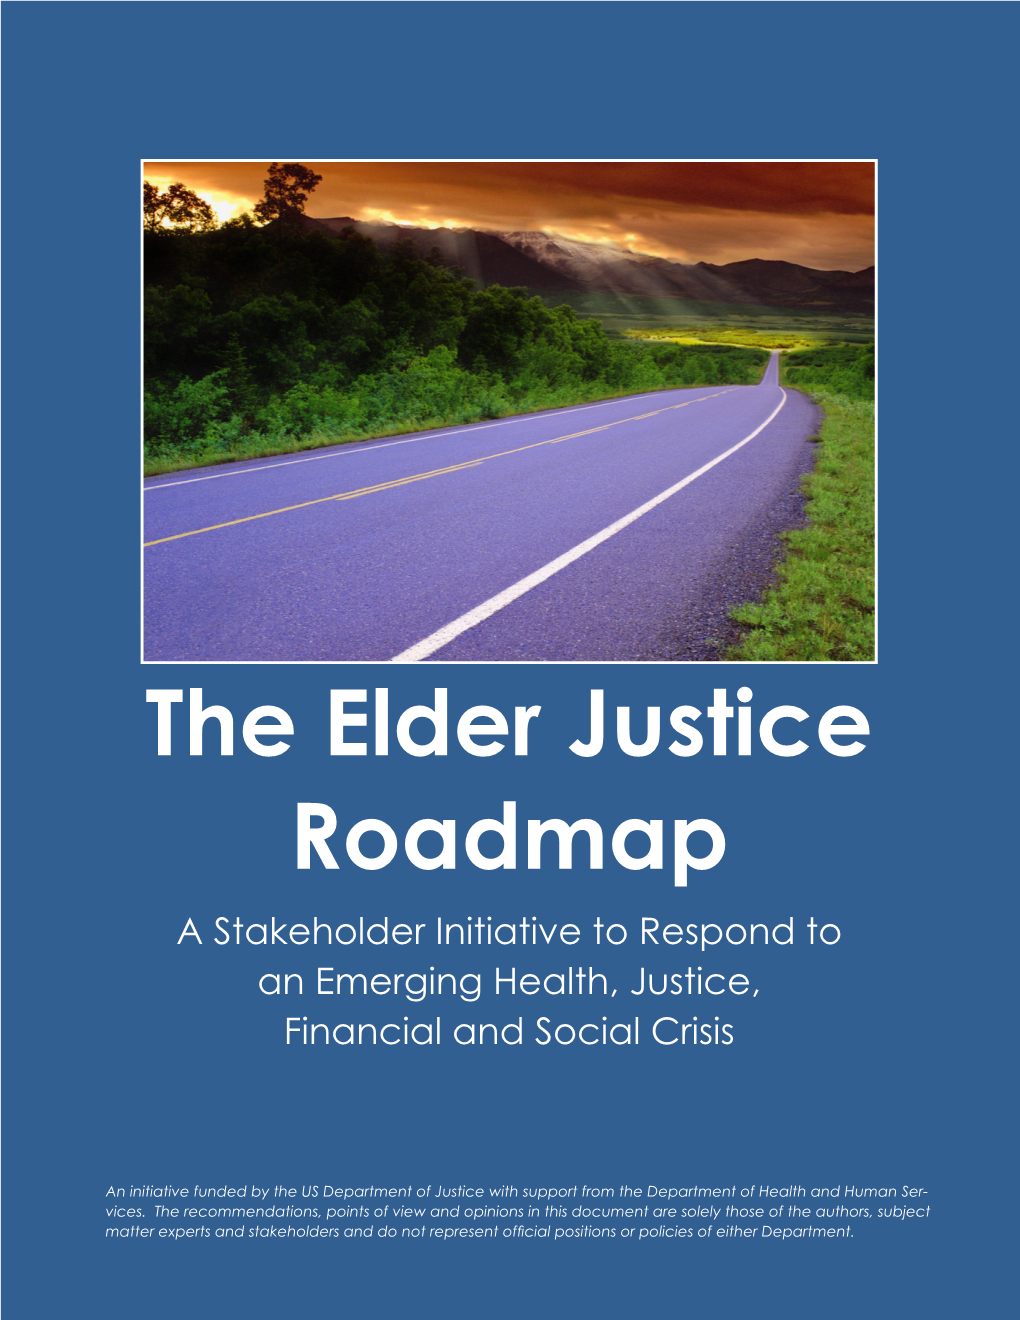 The Elder Justice Roadmap: a Stakeholder Initiative to Respond to an Emerging Health, Justice, Financial and Social Crisis